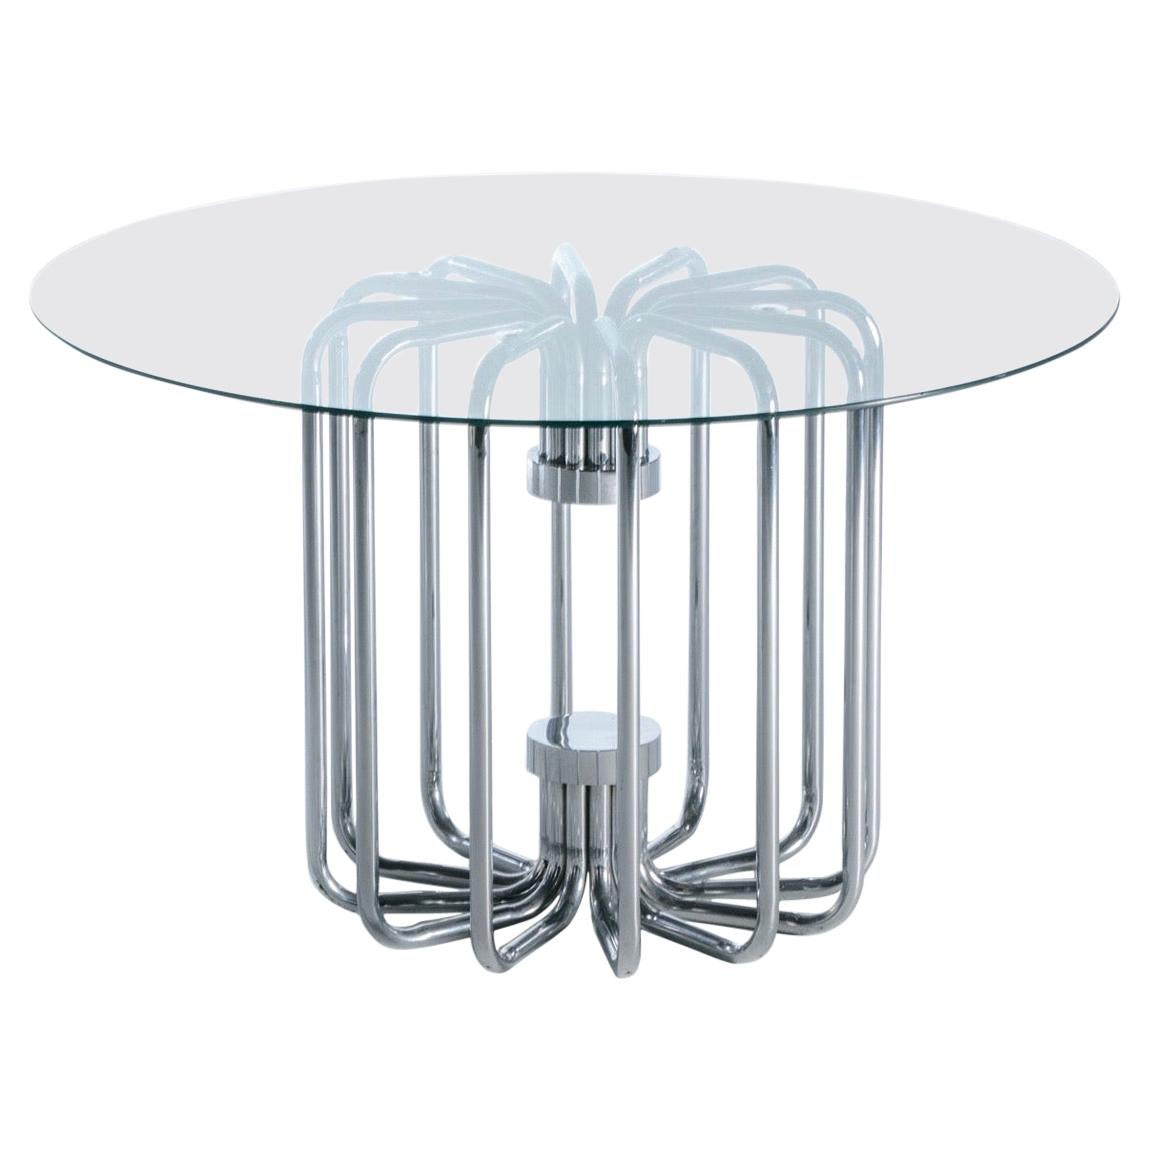 1970s Sculptural Chrome Dining Or Center Table